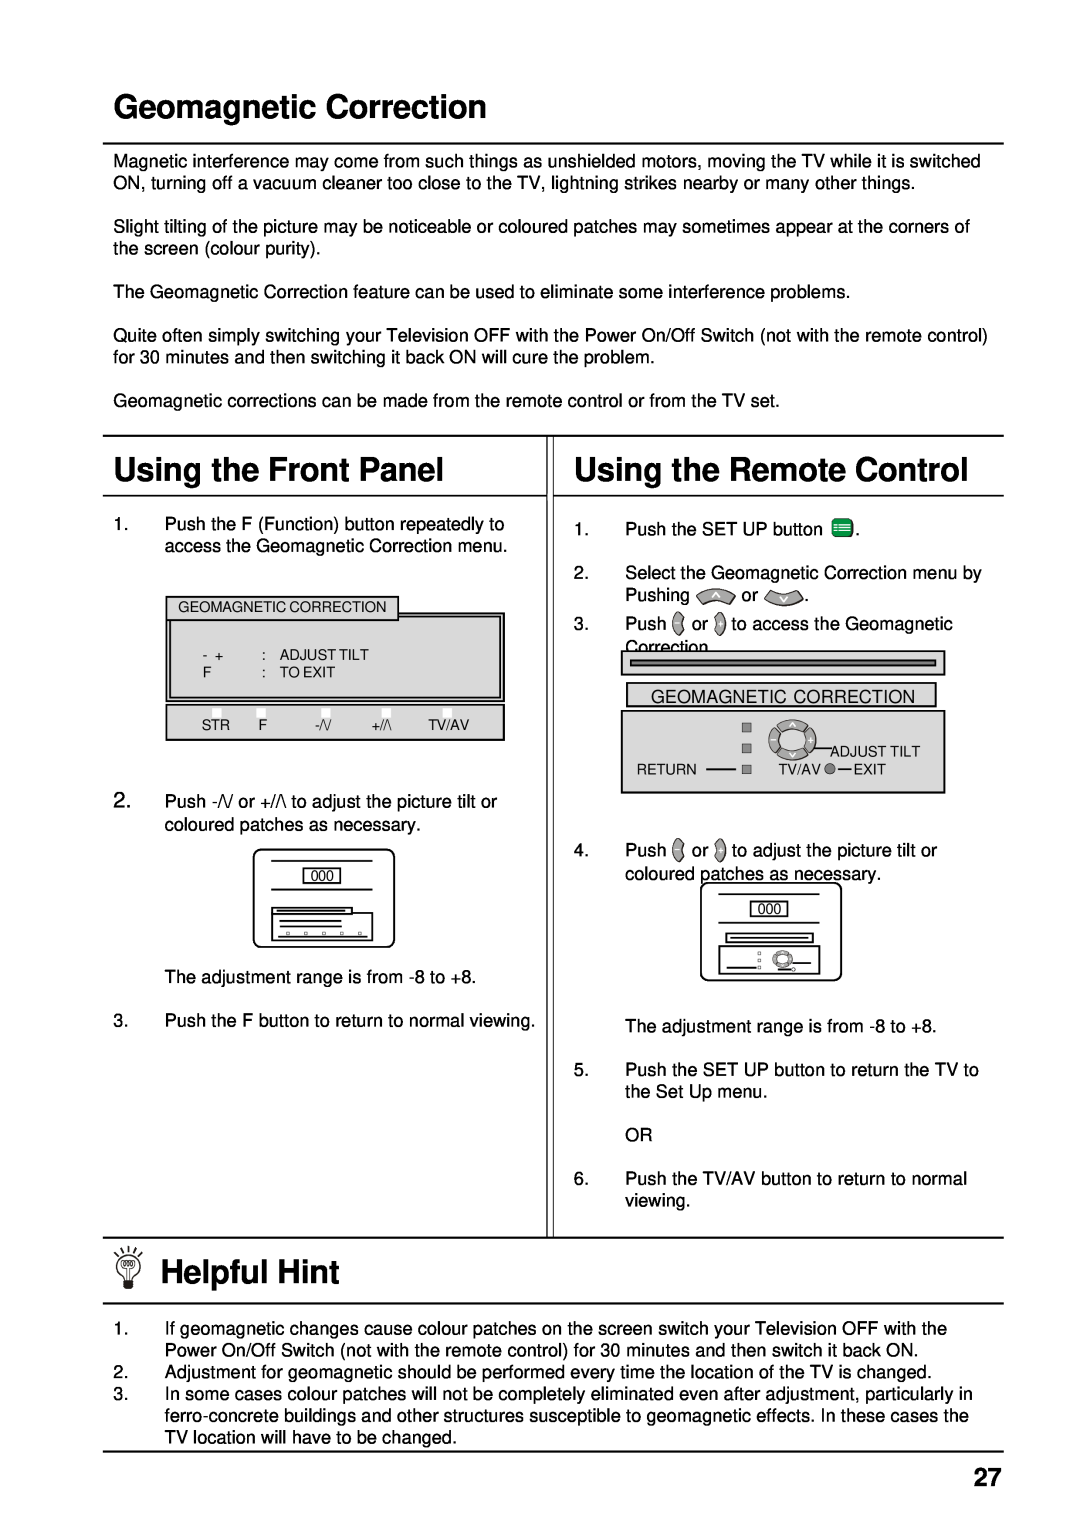 Panasonic TX-68P200A manual Geomagnetic Correction, Helpful Hint, Using the Front Panel, Using the Remote Control 